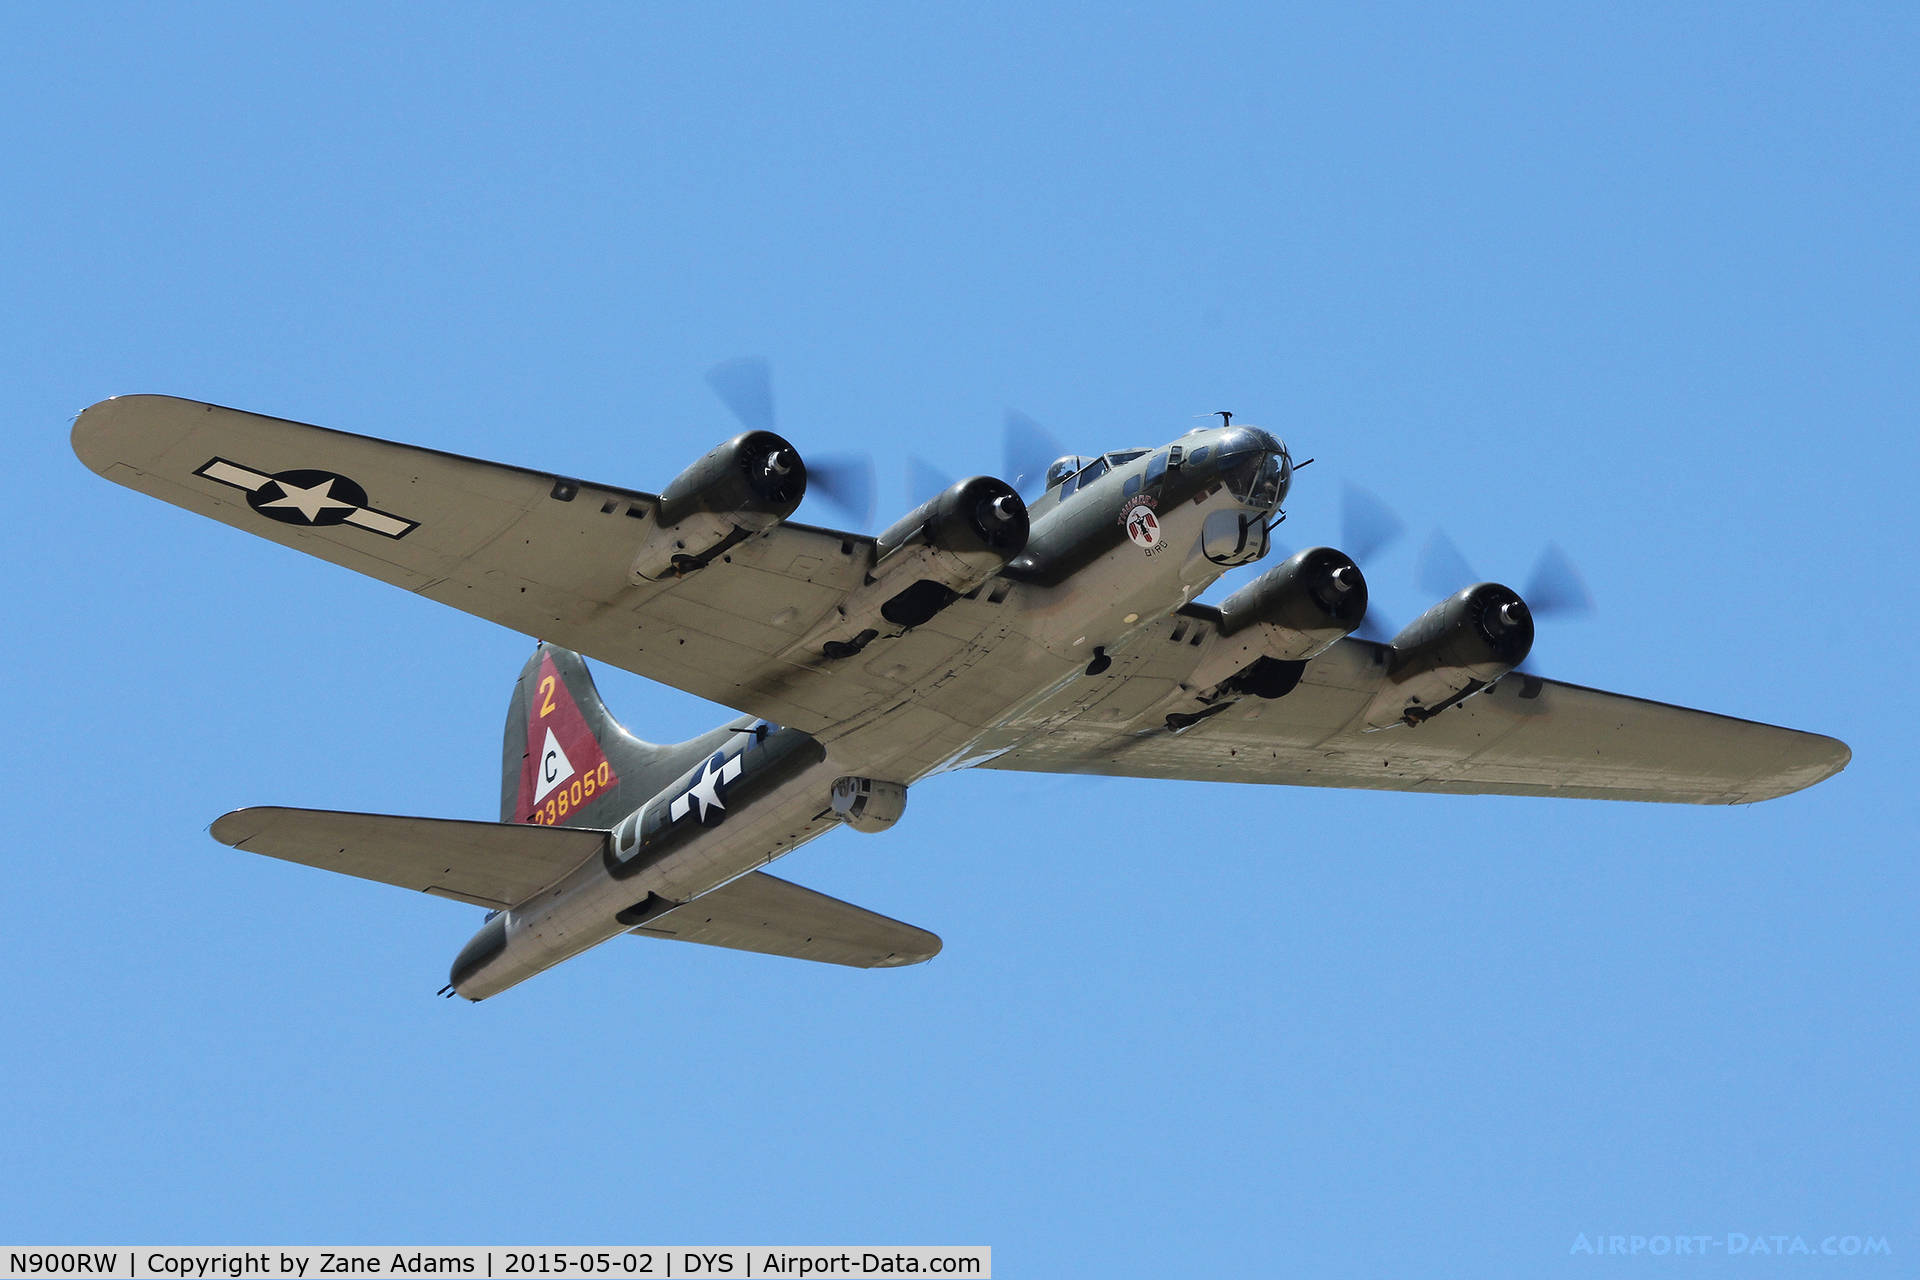 N900RW, 1944 Boeing B-17G Flying Fortress C/N 8627, At the 2014 Big Country Airshow - Dyess AFB, TX